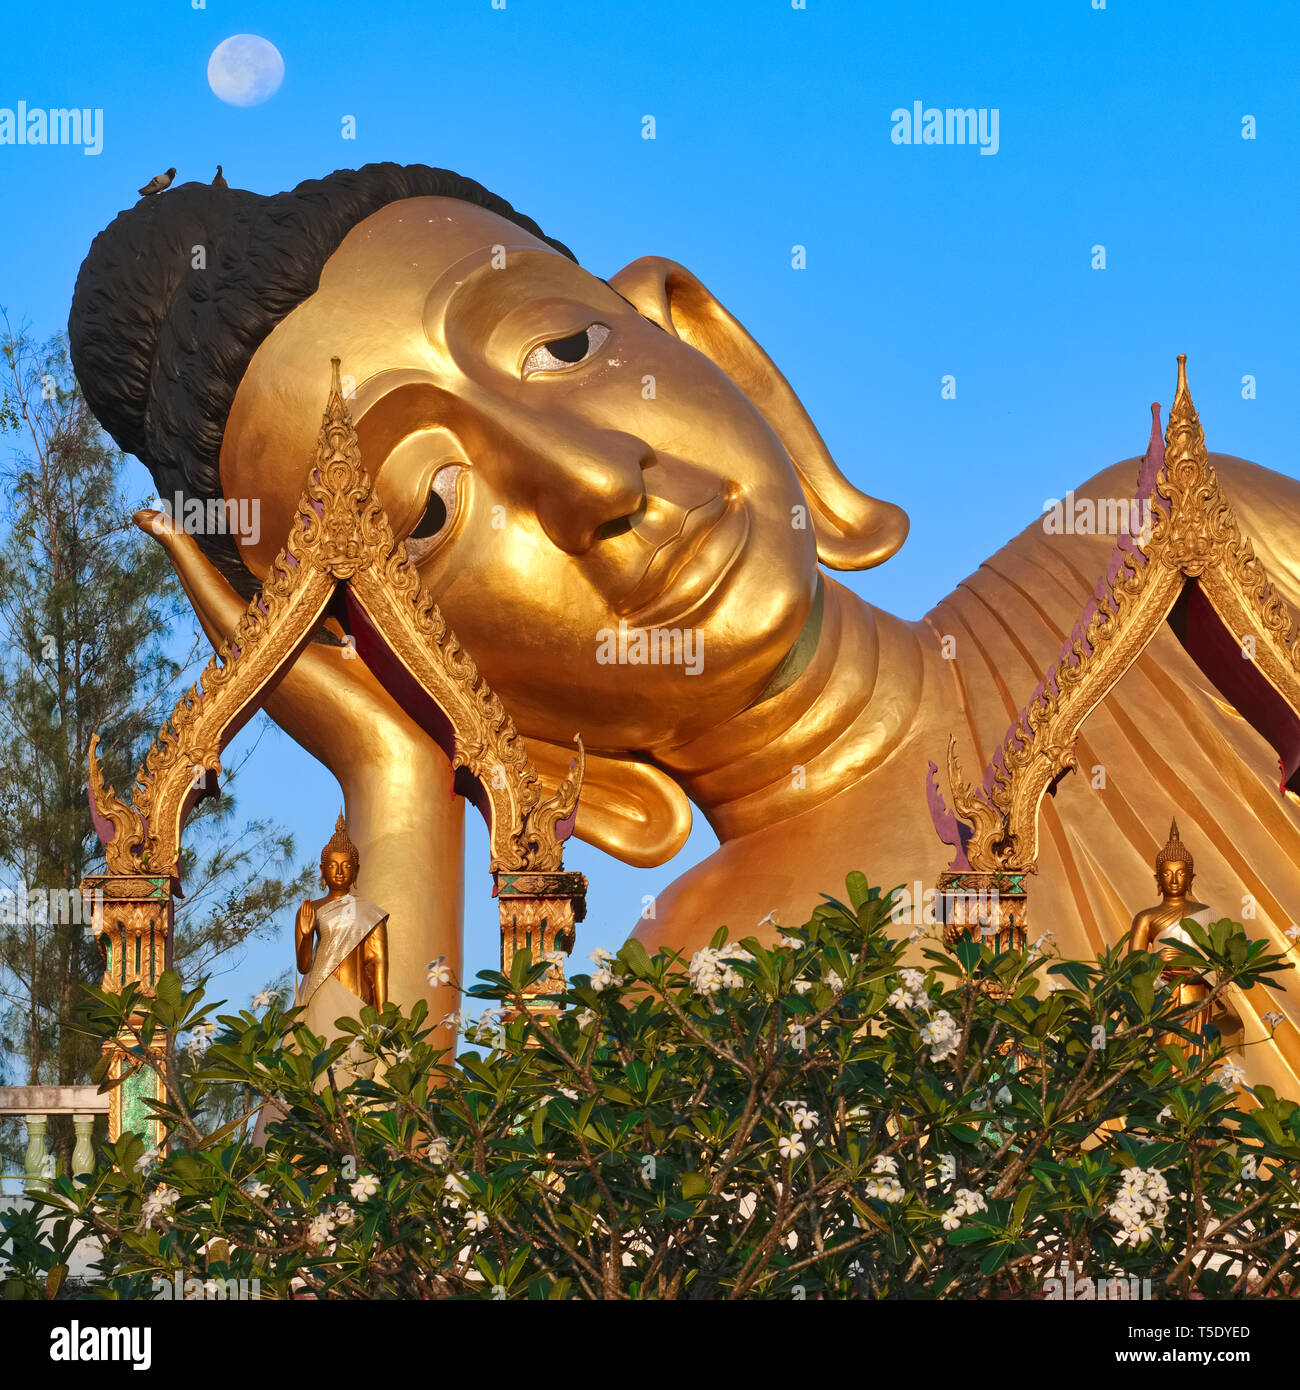 Early in the morning, the full moon is seen over the head of the large Reclining Buddha of Wat Sri Sunthorn (Soonthorn) in Thalang, Phuket, Thailand Stock Photo